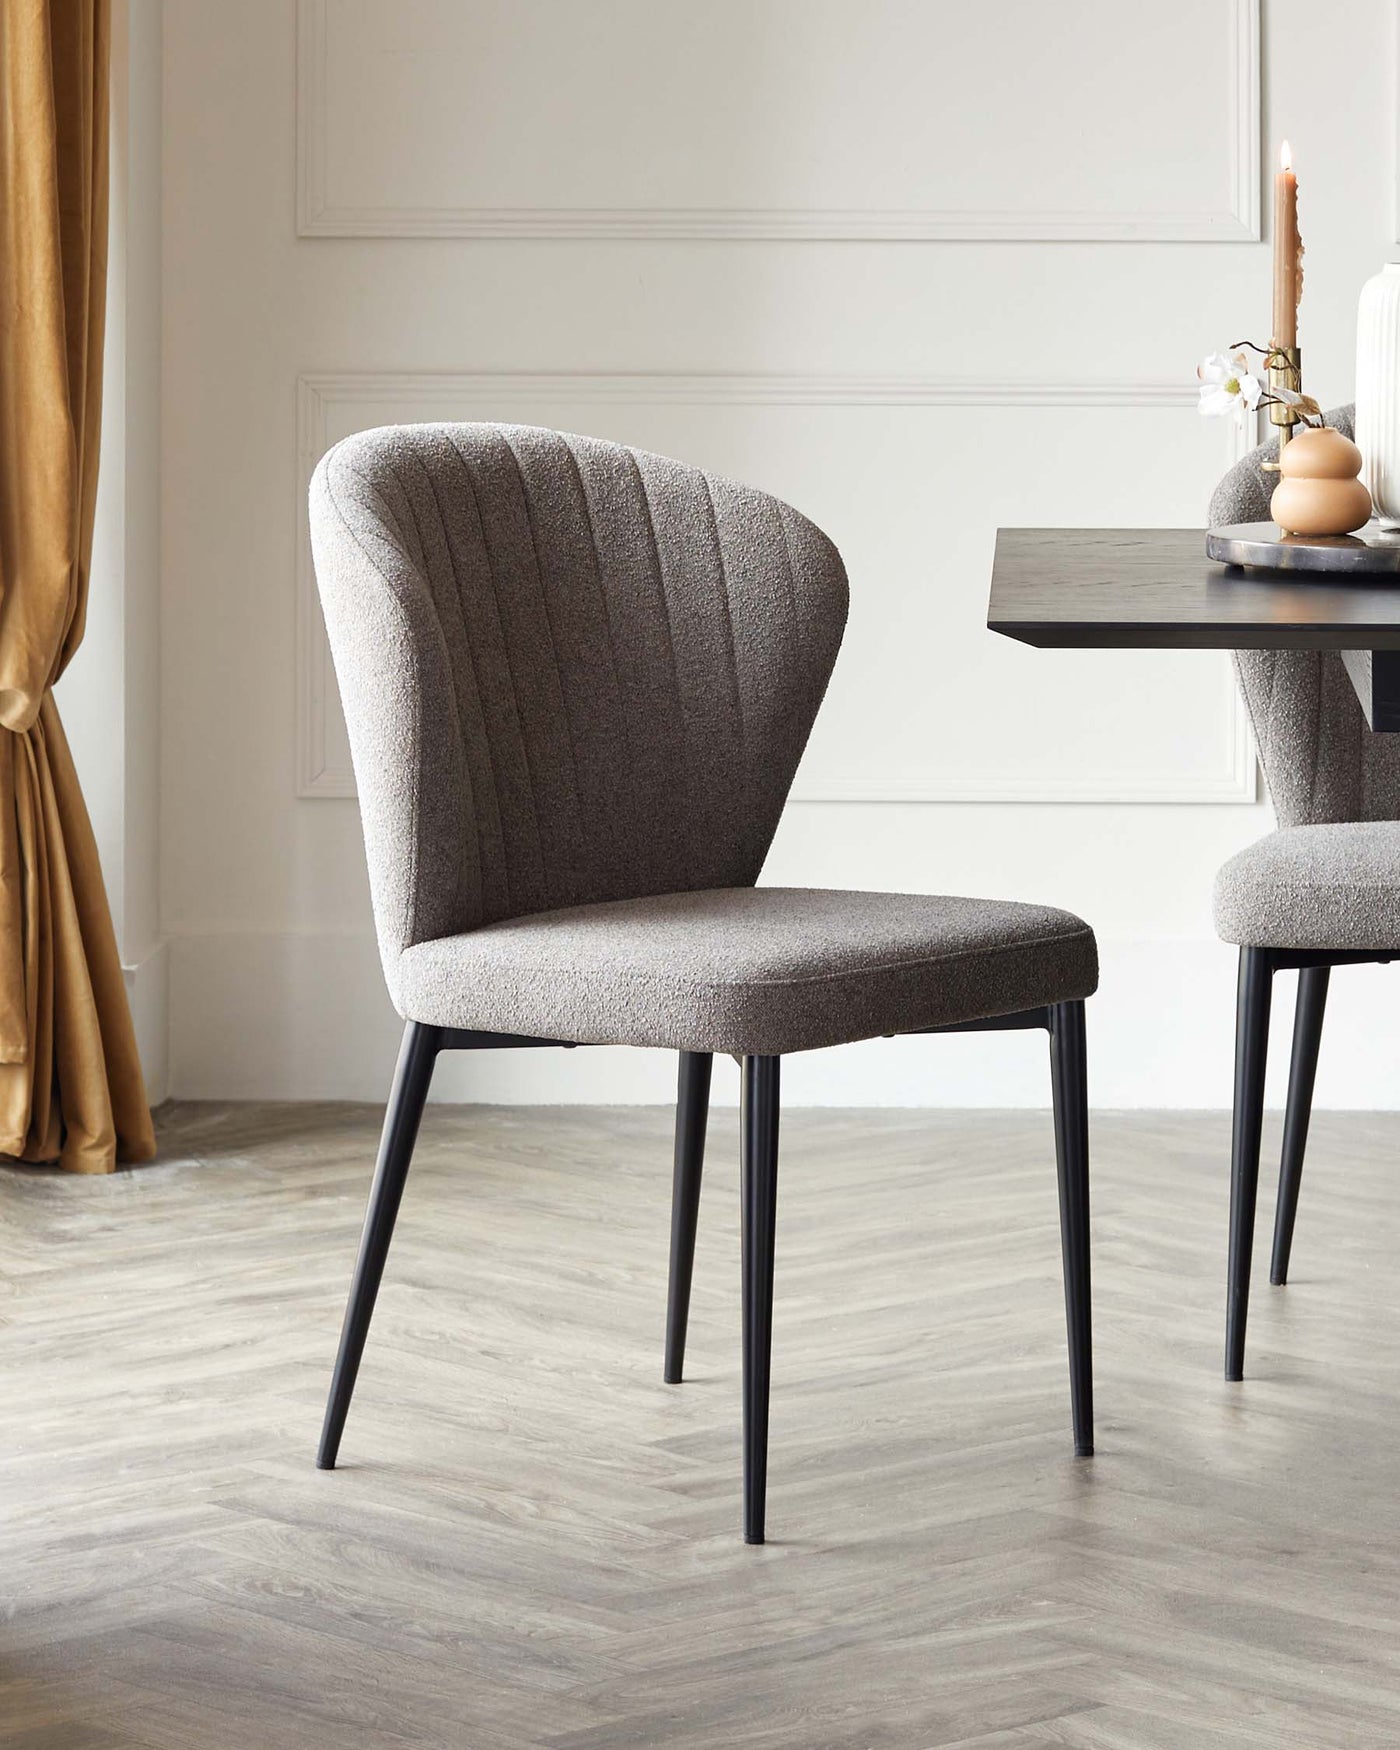 Modern upholstered dining chair with vertical stitching detail on the backrest, a textured grey fabric, and angled black metal legs. A minimalist rectangular black dining table is partially visible with decorative items on top. The setting features a light hardwood floor and elegant white wainscoting on the walls, accented by a golden-coloured curtain on the left side.